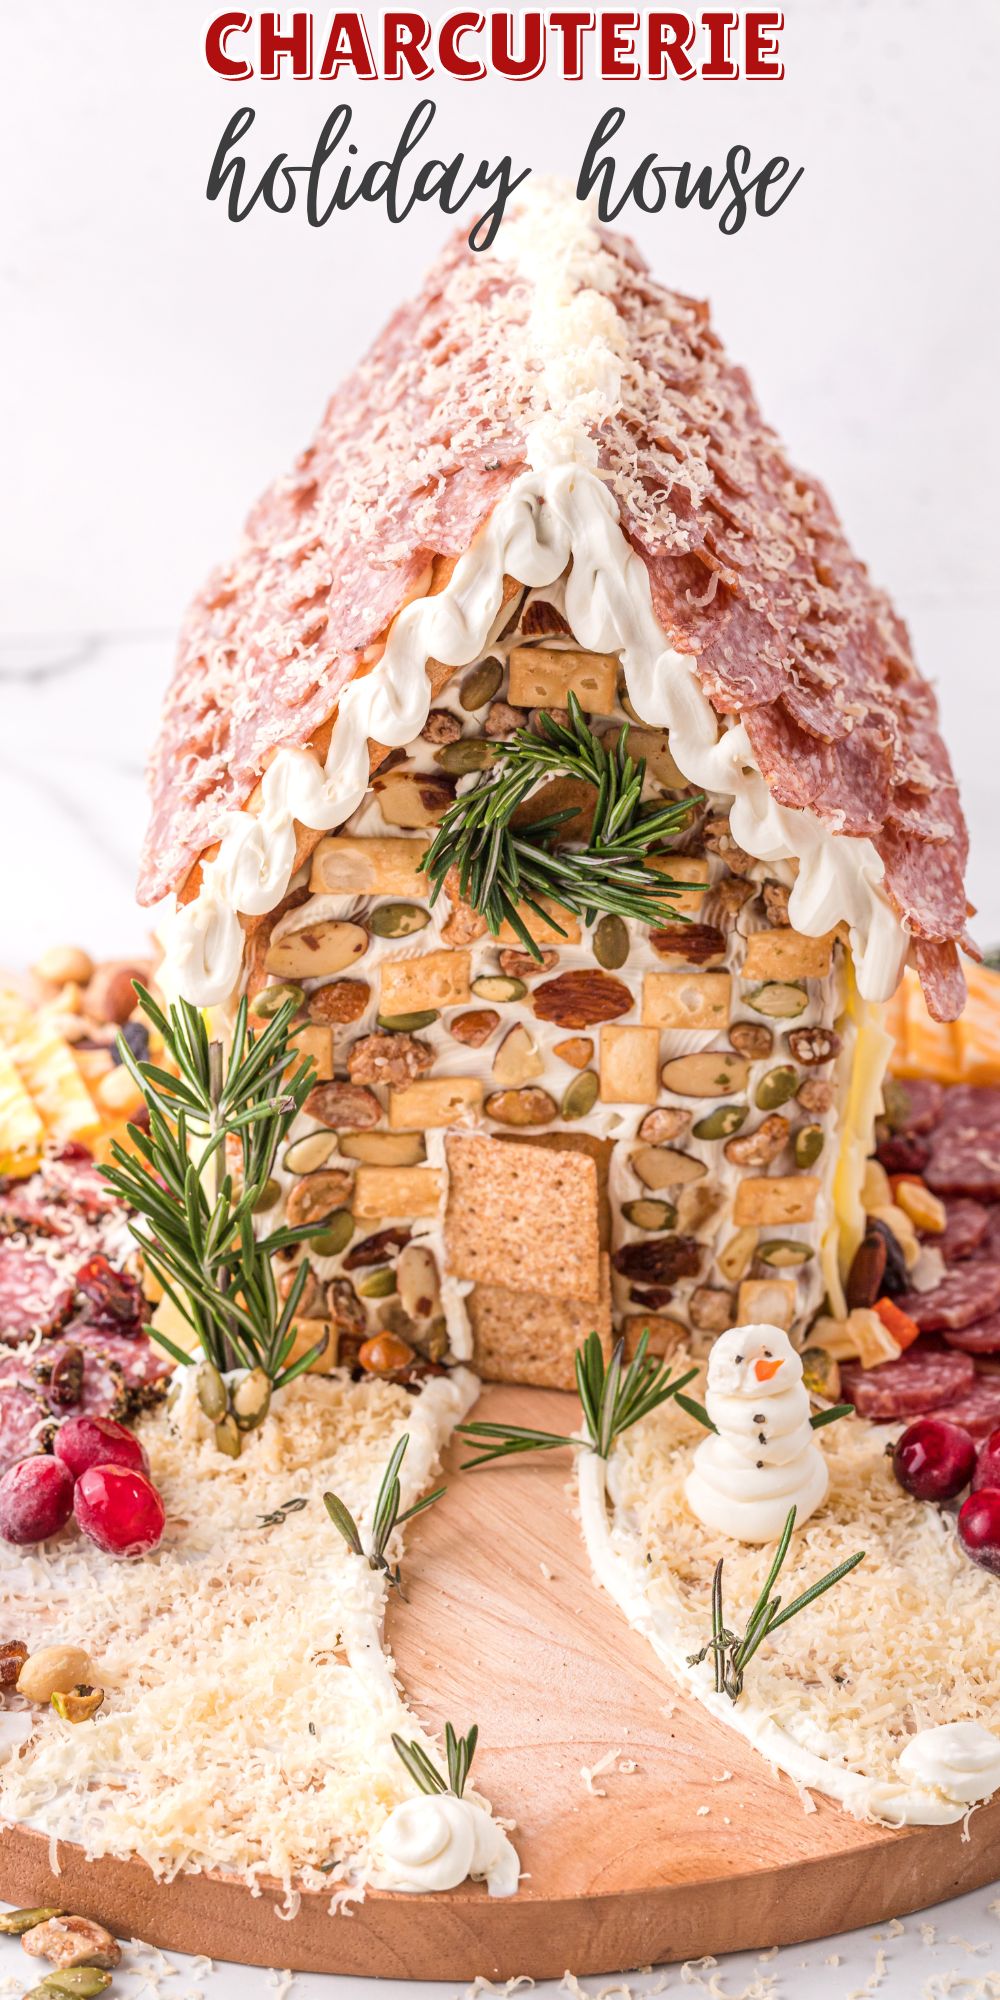 You know those gingerbread houses decorated with sweets? Well, this Charcuterie Holiday House Chalet is a savory version – covered with meats! via @familyfresh